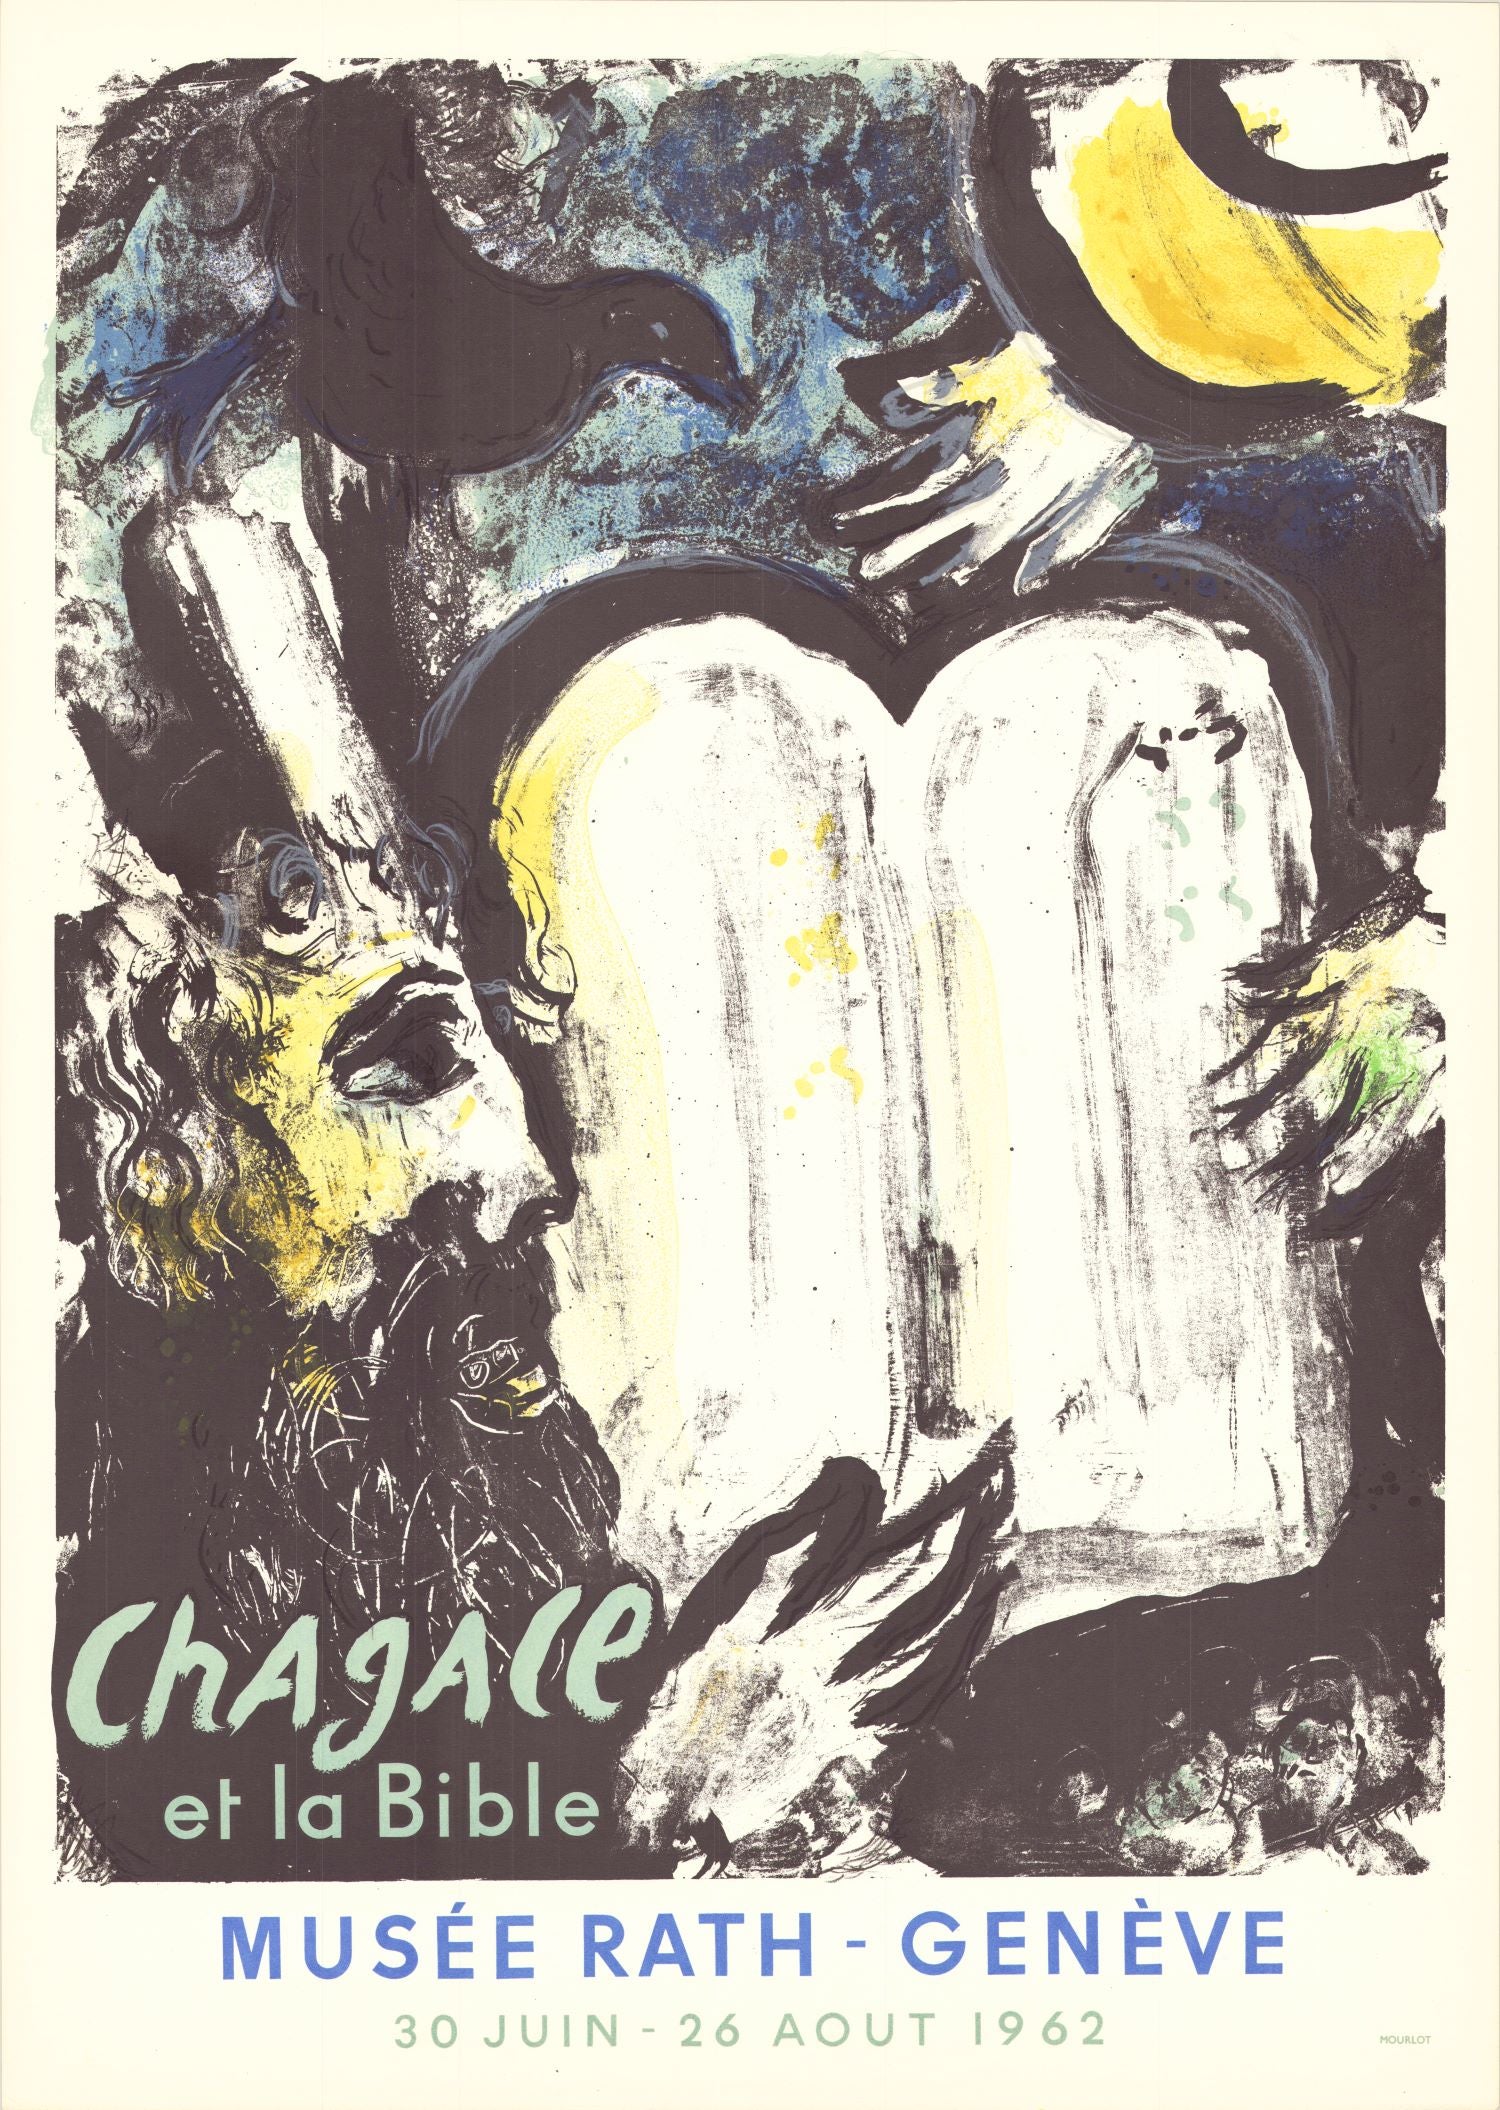 Chagall et le Bible - Musee Rath, Geneva 1962